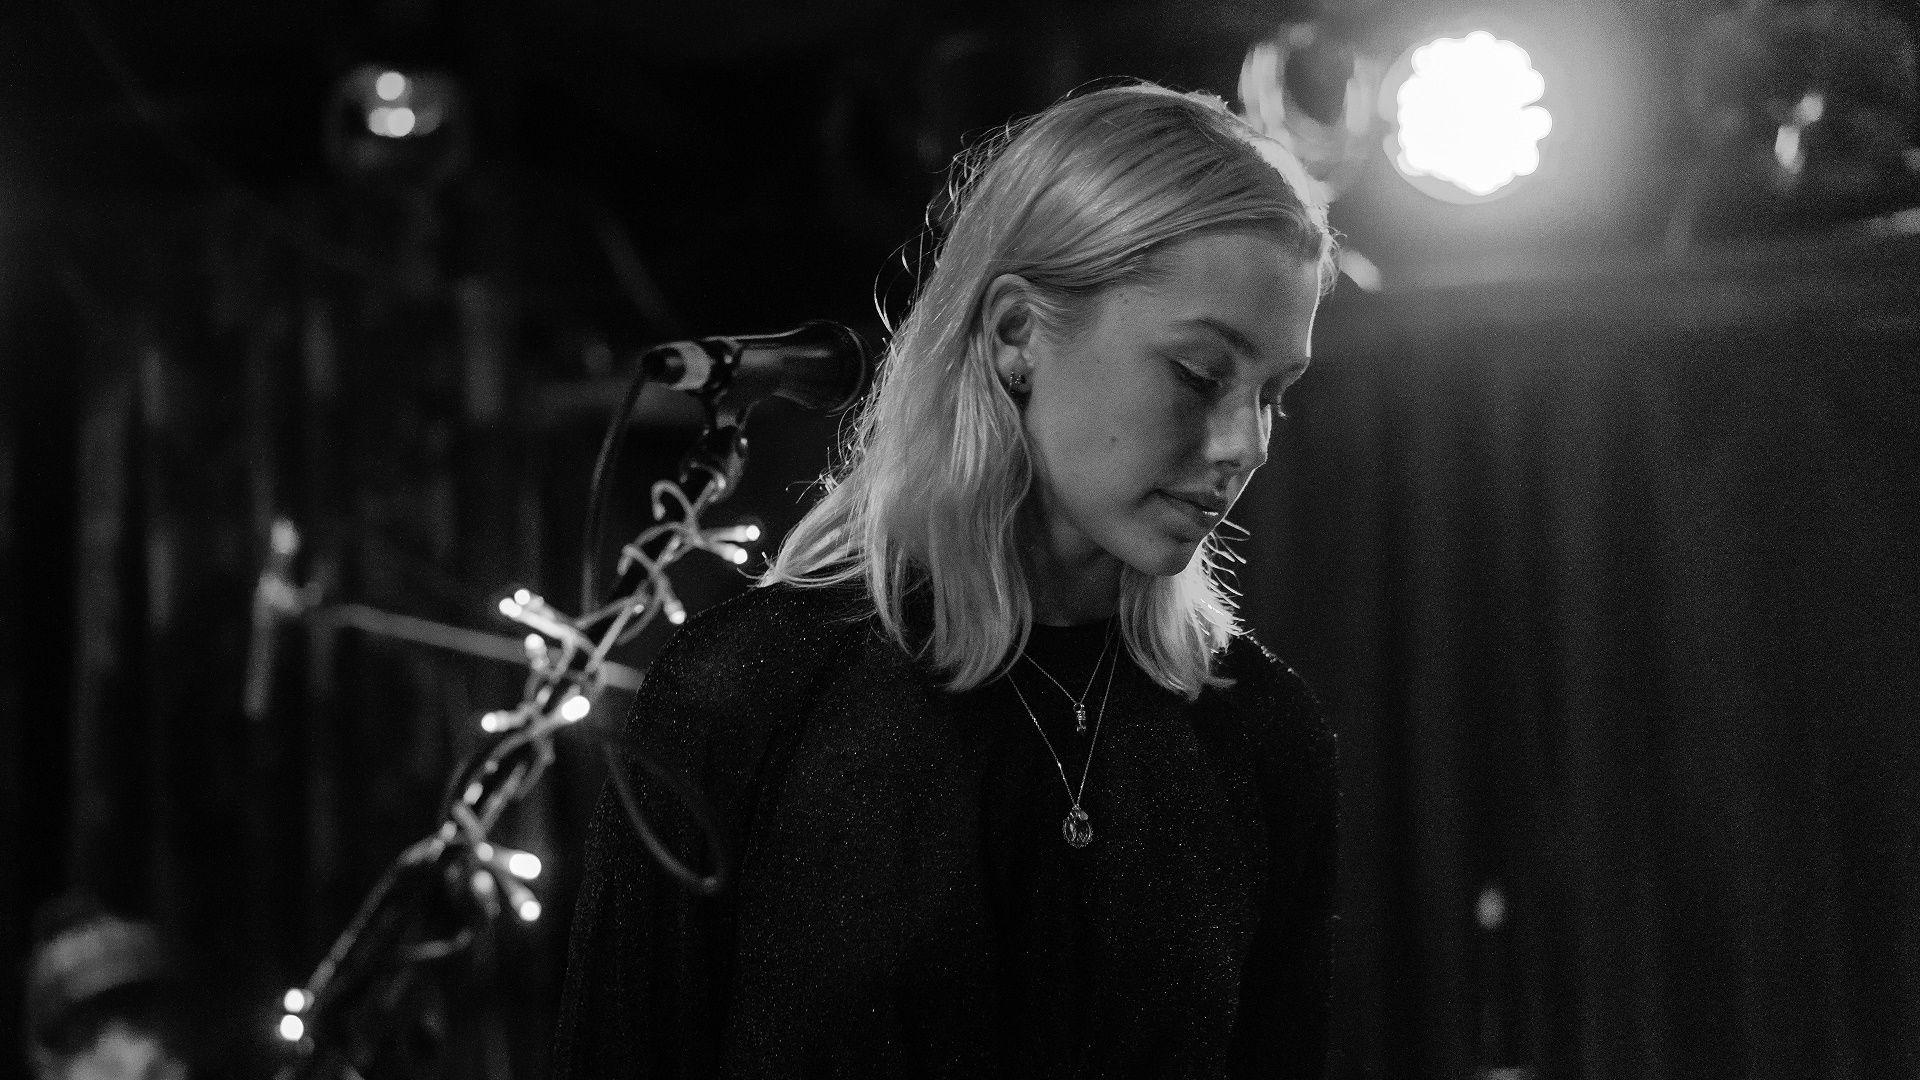 On Punisher Phoebe Bridgers Taps Into the Anxiety of a Generation